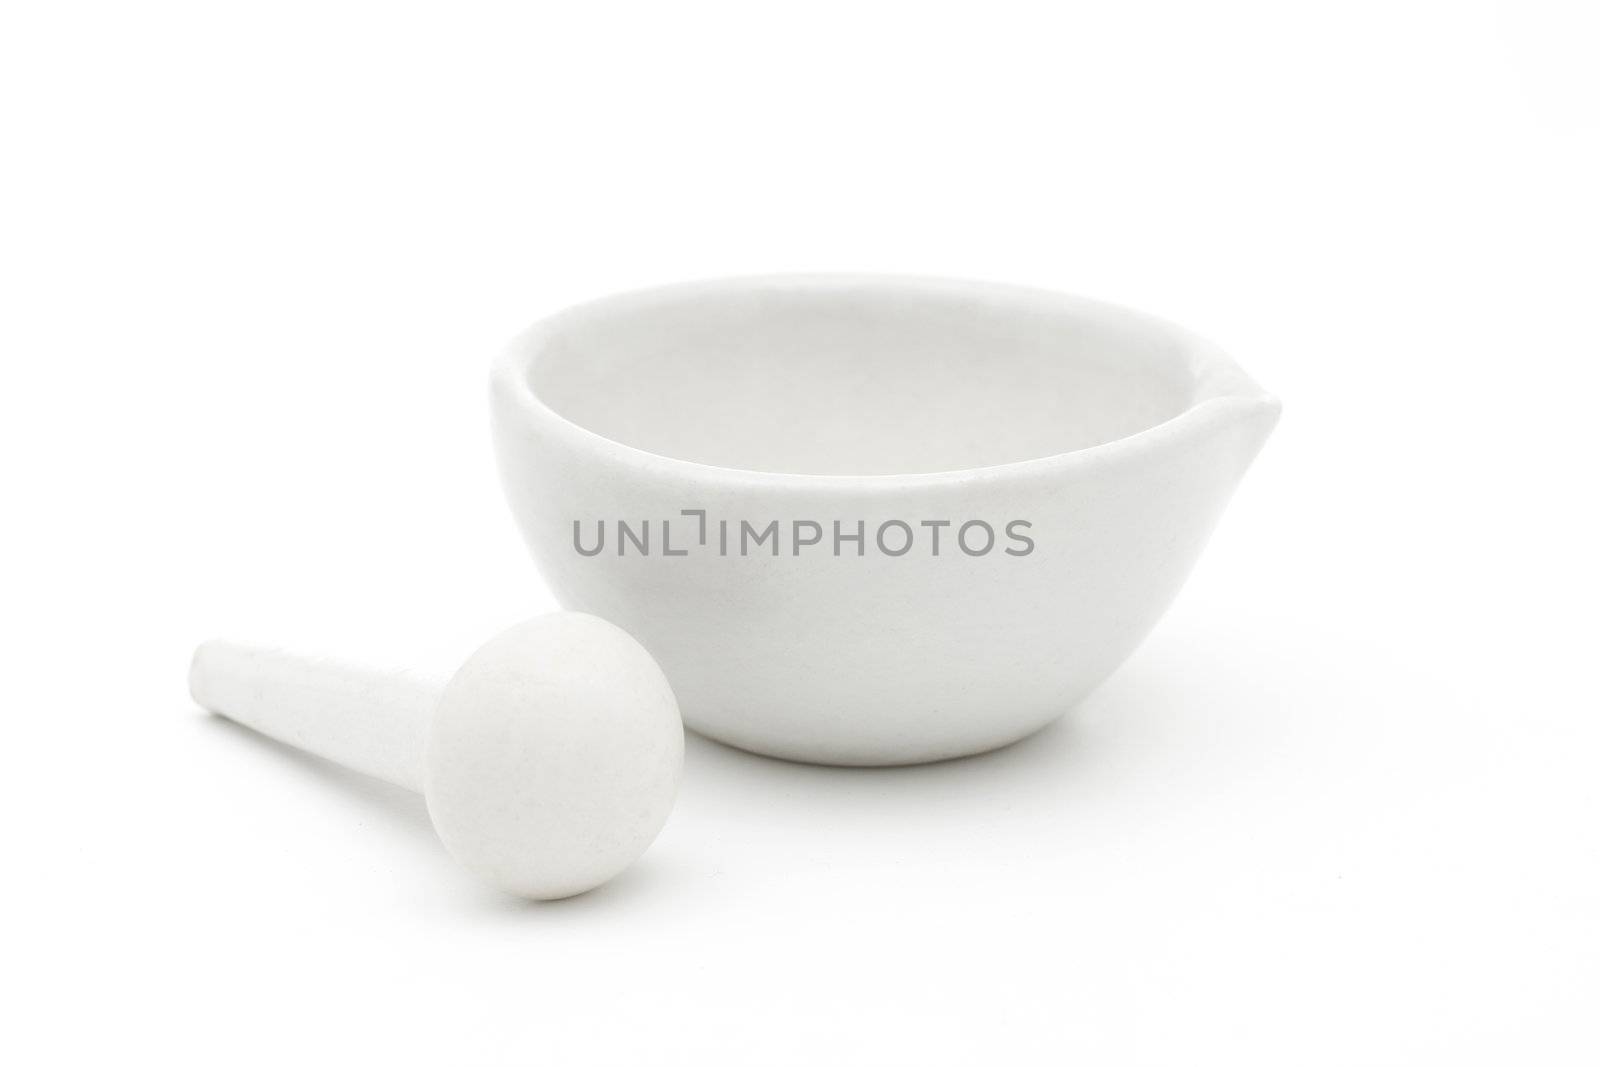 White mortar and pestle over white background